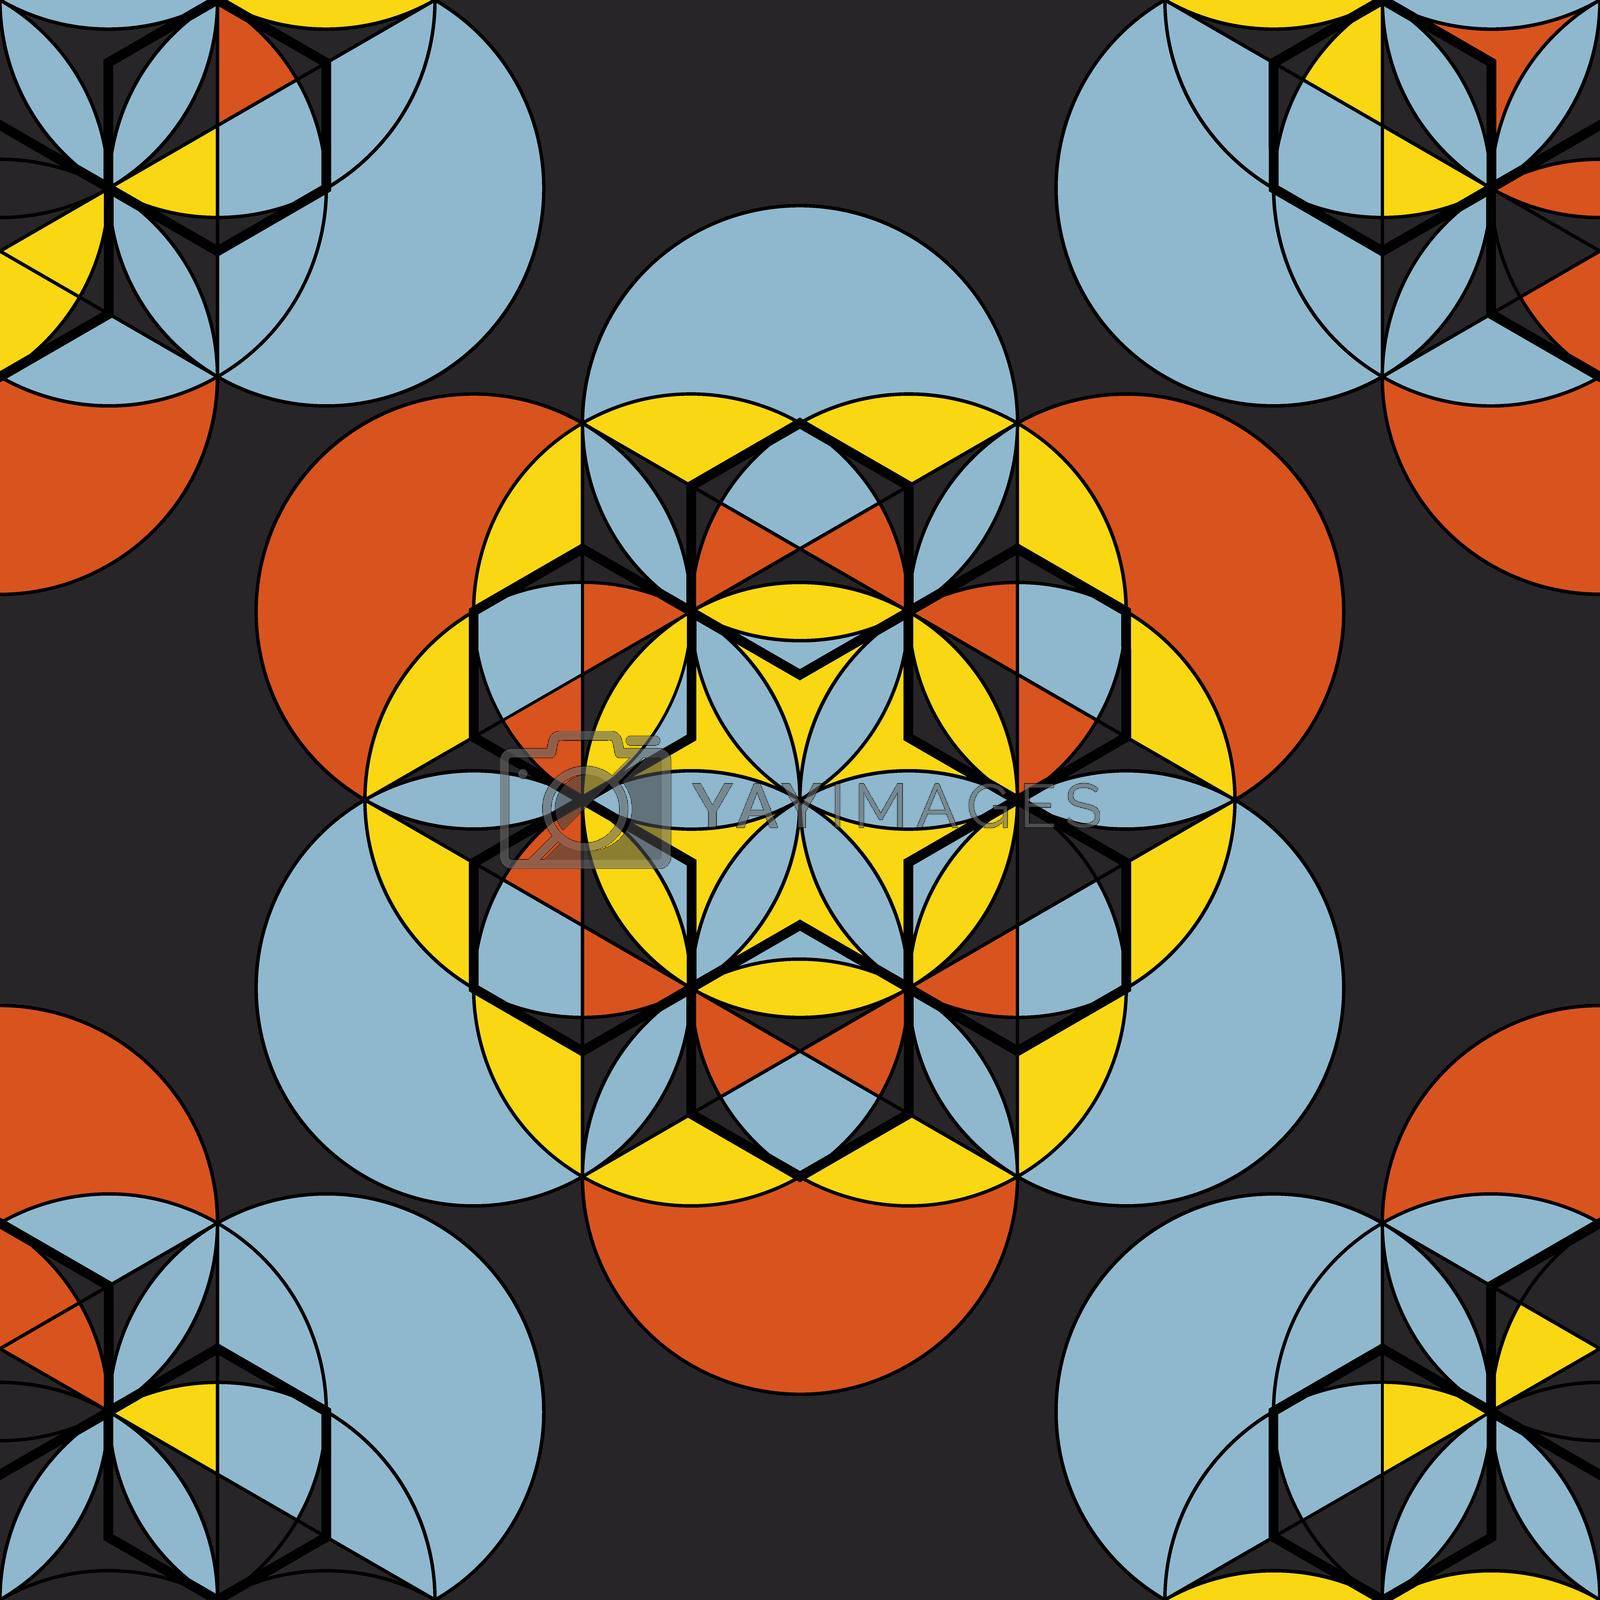 Background pattern with decorative geometric and abstract elements